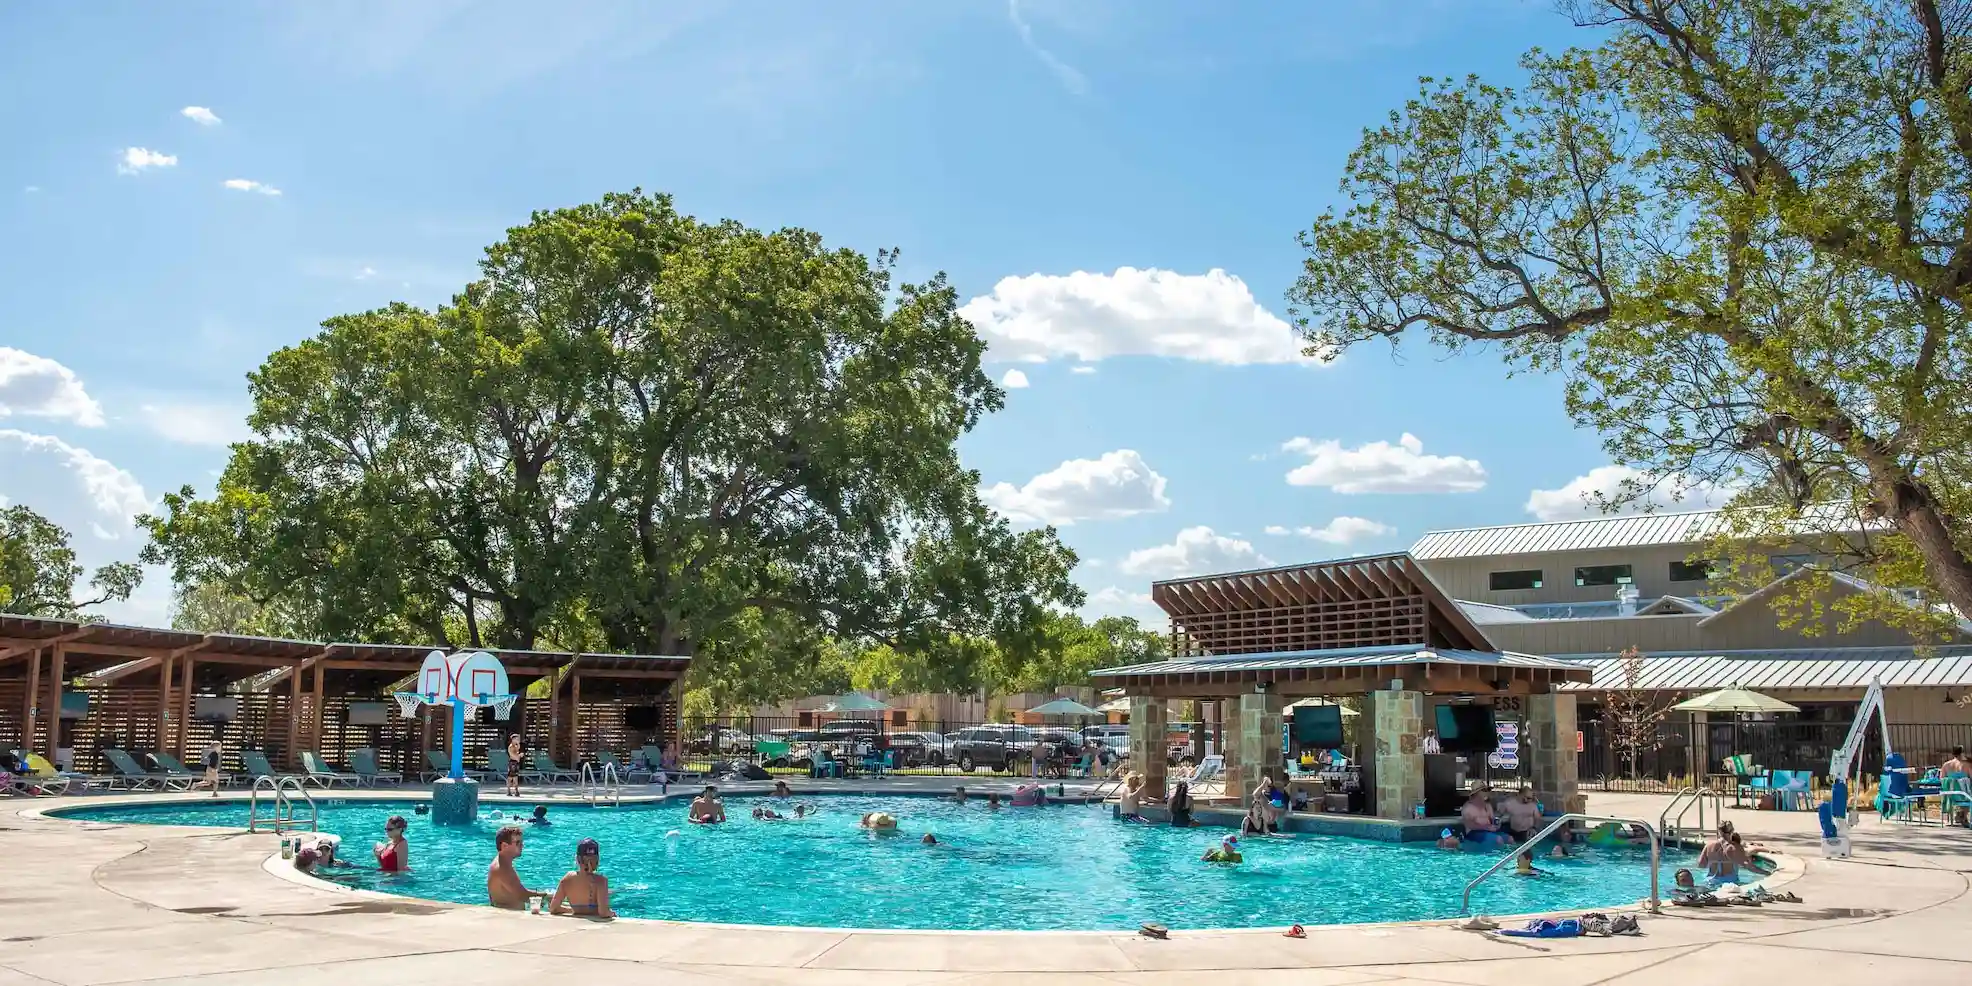 Cool off after participating in the Ironman 70.3 Waco in the Camp Fimfo Waco pool and swim-up bar